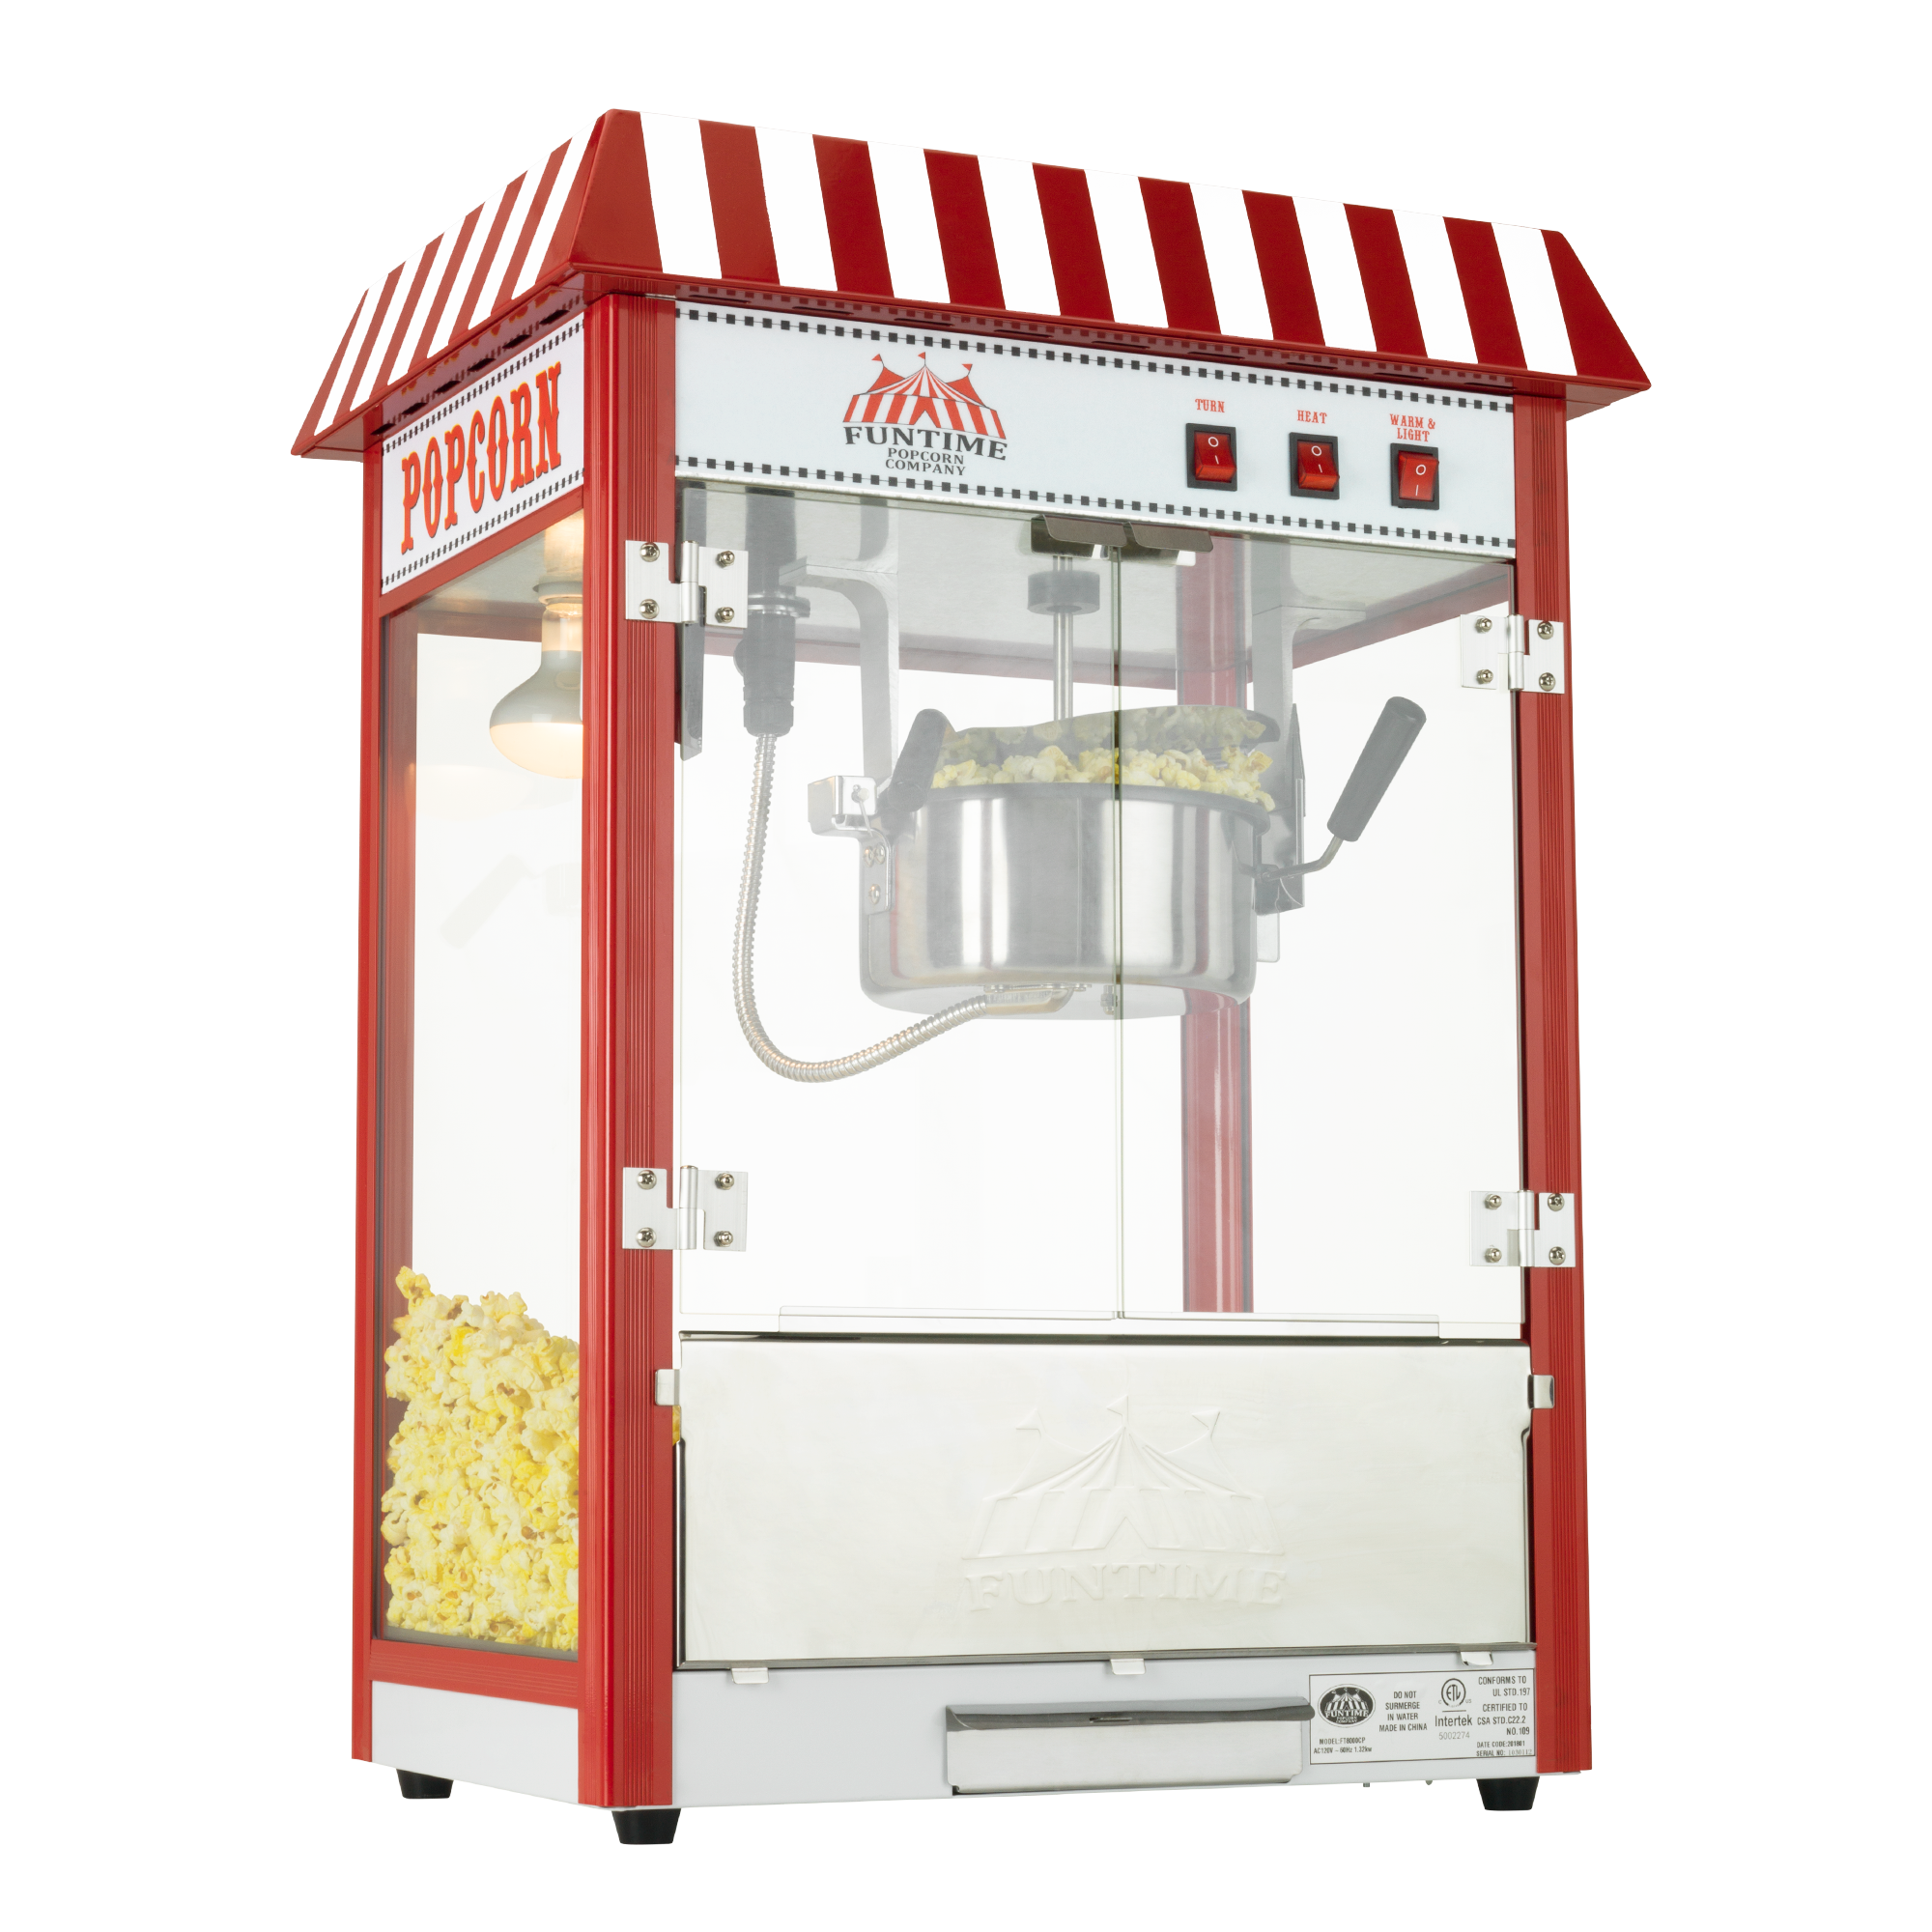  Kolice Commercial 8-Ounce Professional Popcorn Machine,  Electric Popcorn Maker, Popcorn popper, Automatic Popcorn Machine with Roof  : Industrial & Scientific